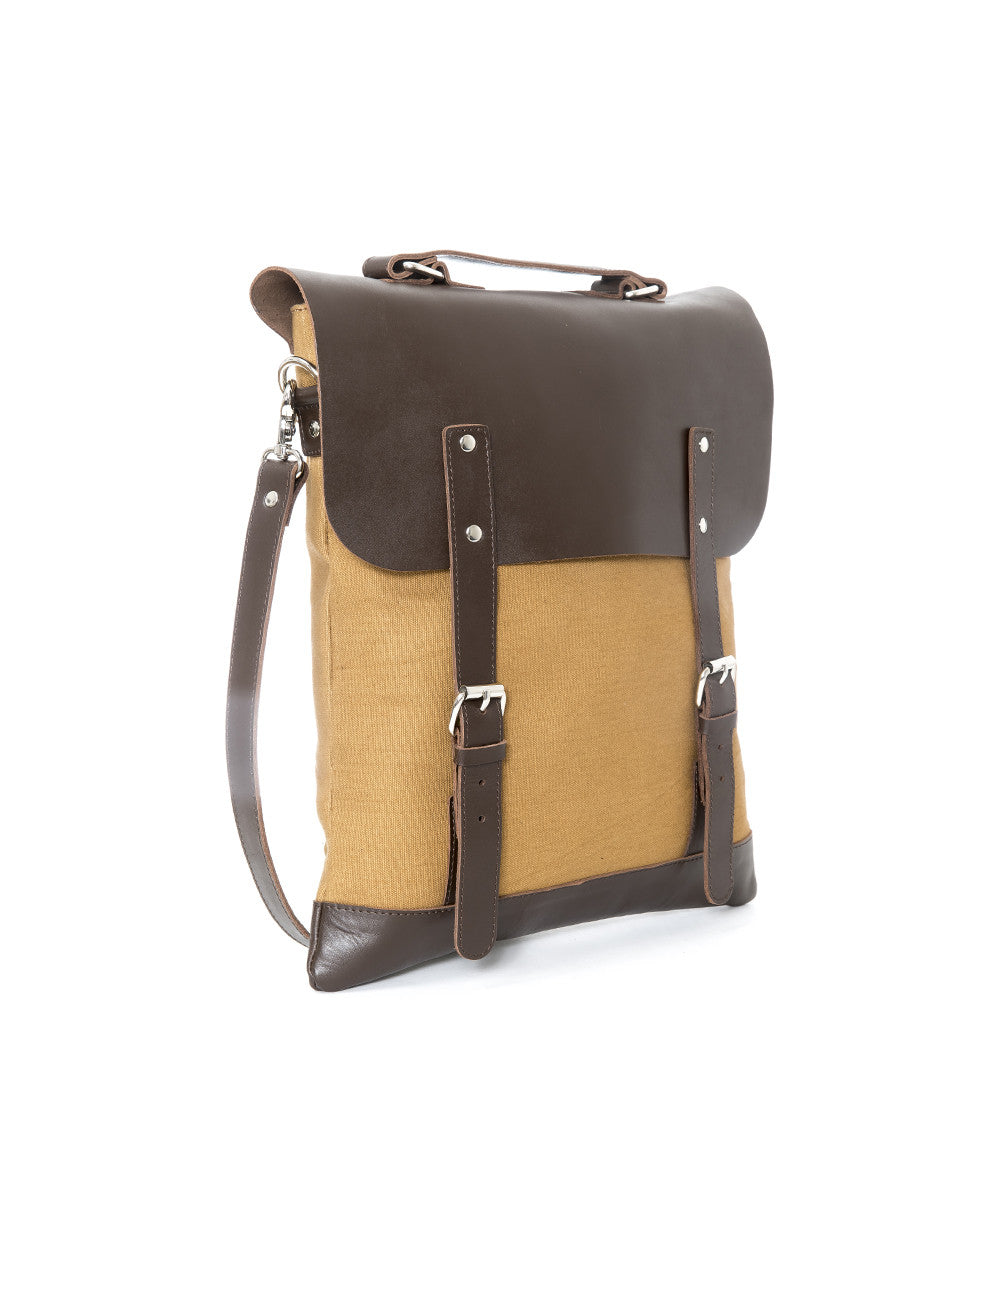 Enter Leather/Canvas Messenger Tote